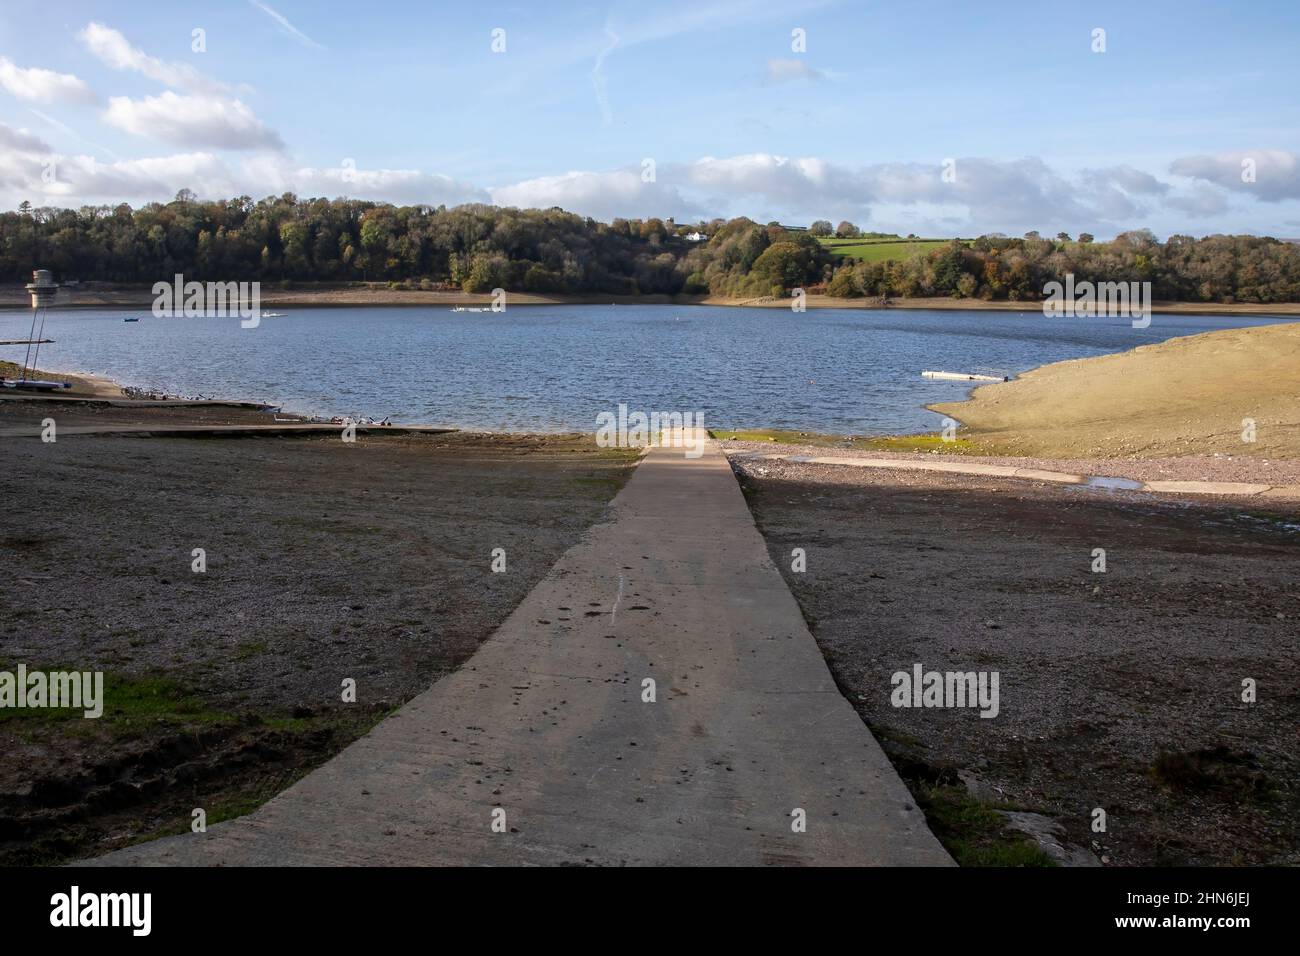 The runway jetty of a boating reservoir Stock Photo